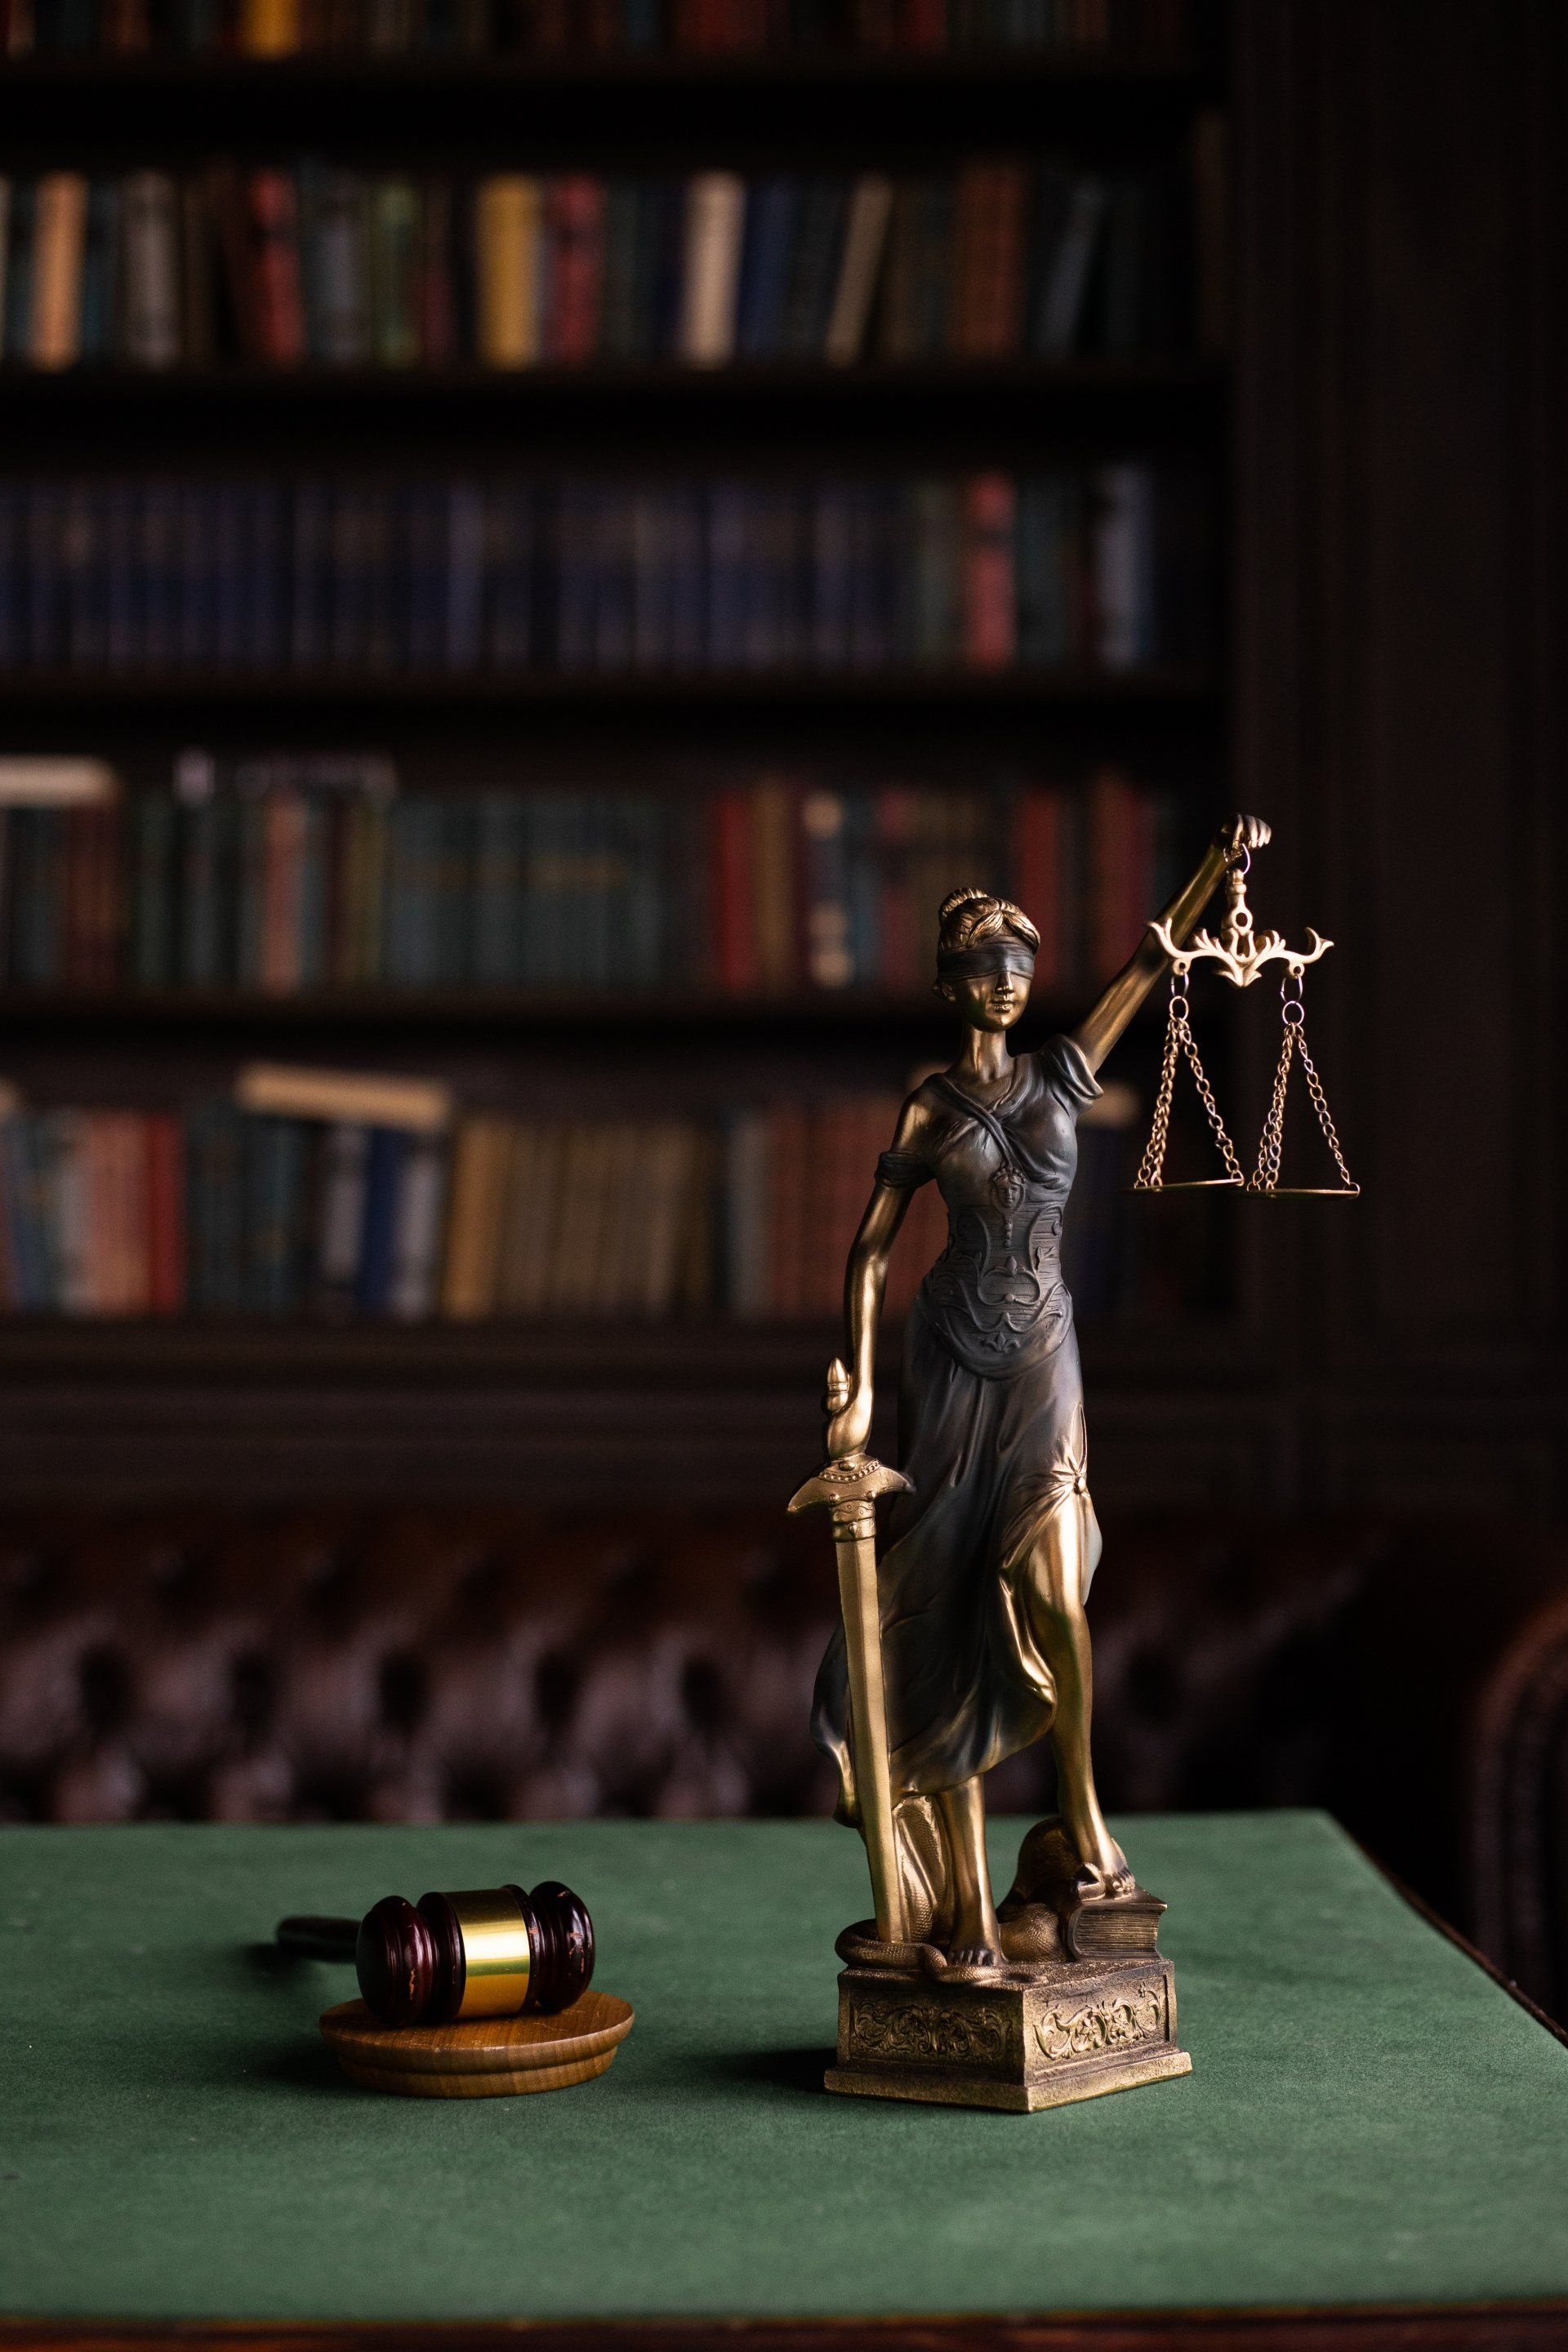 Bookshelves in the background and the scales of justice in the foreground